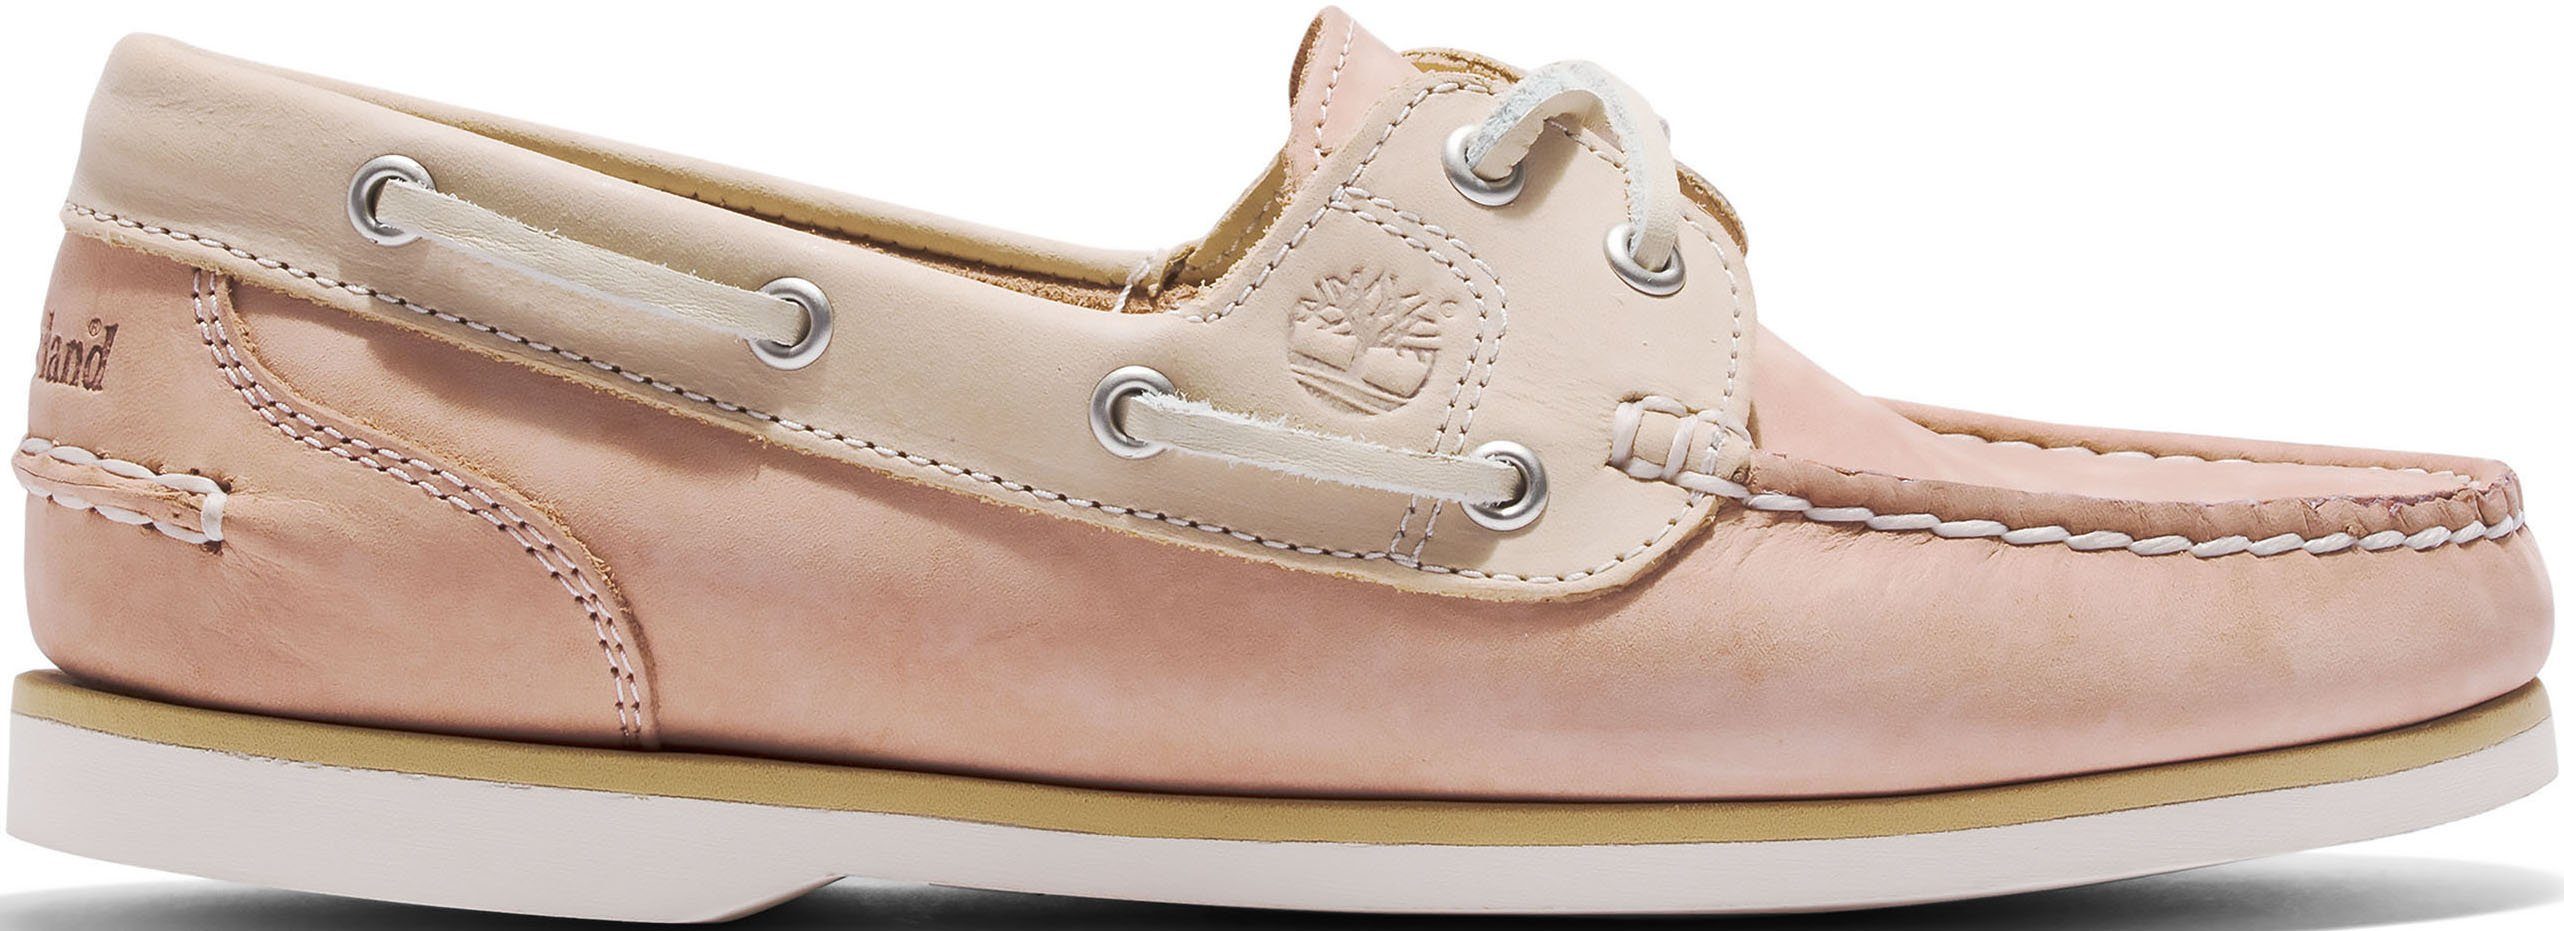 Timberland Classic Boat Eye 2 beige Bootsschuh